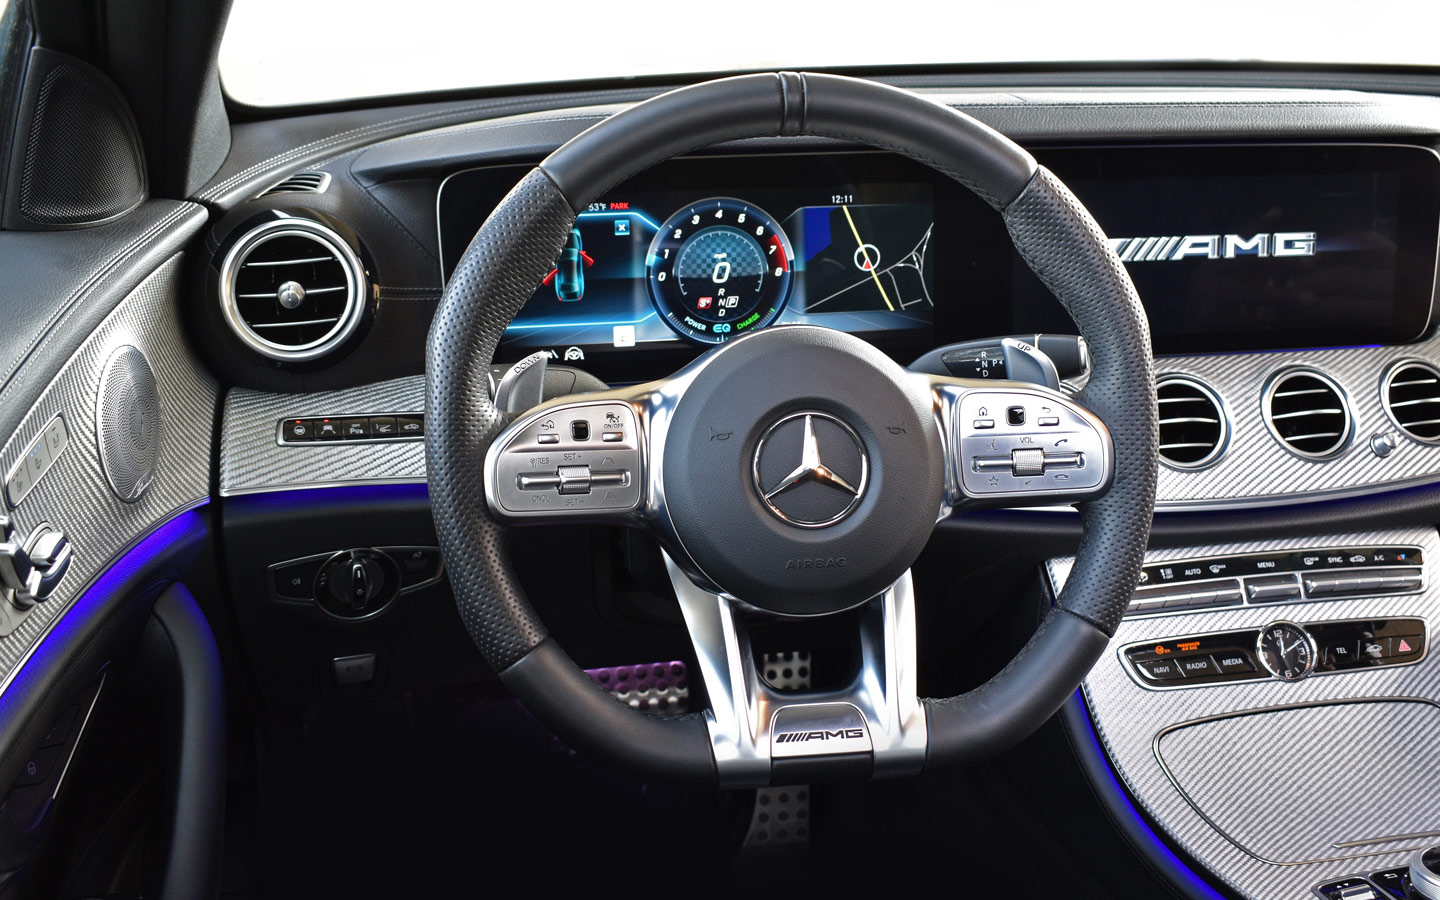 Mercedes-Benz Energizing Comfort Control uses several features to provide a relaxing driving experience